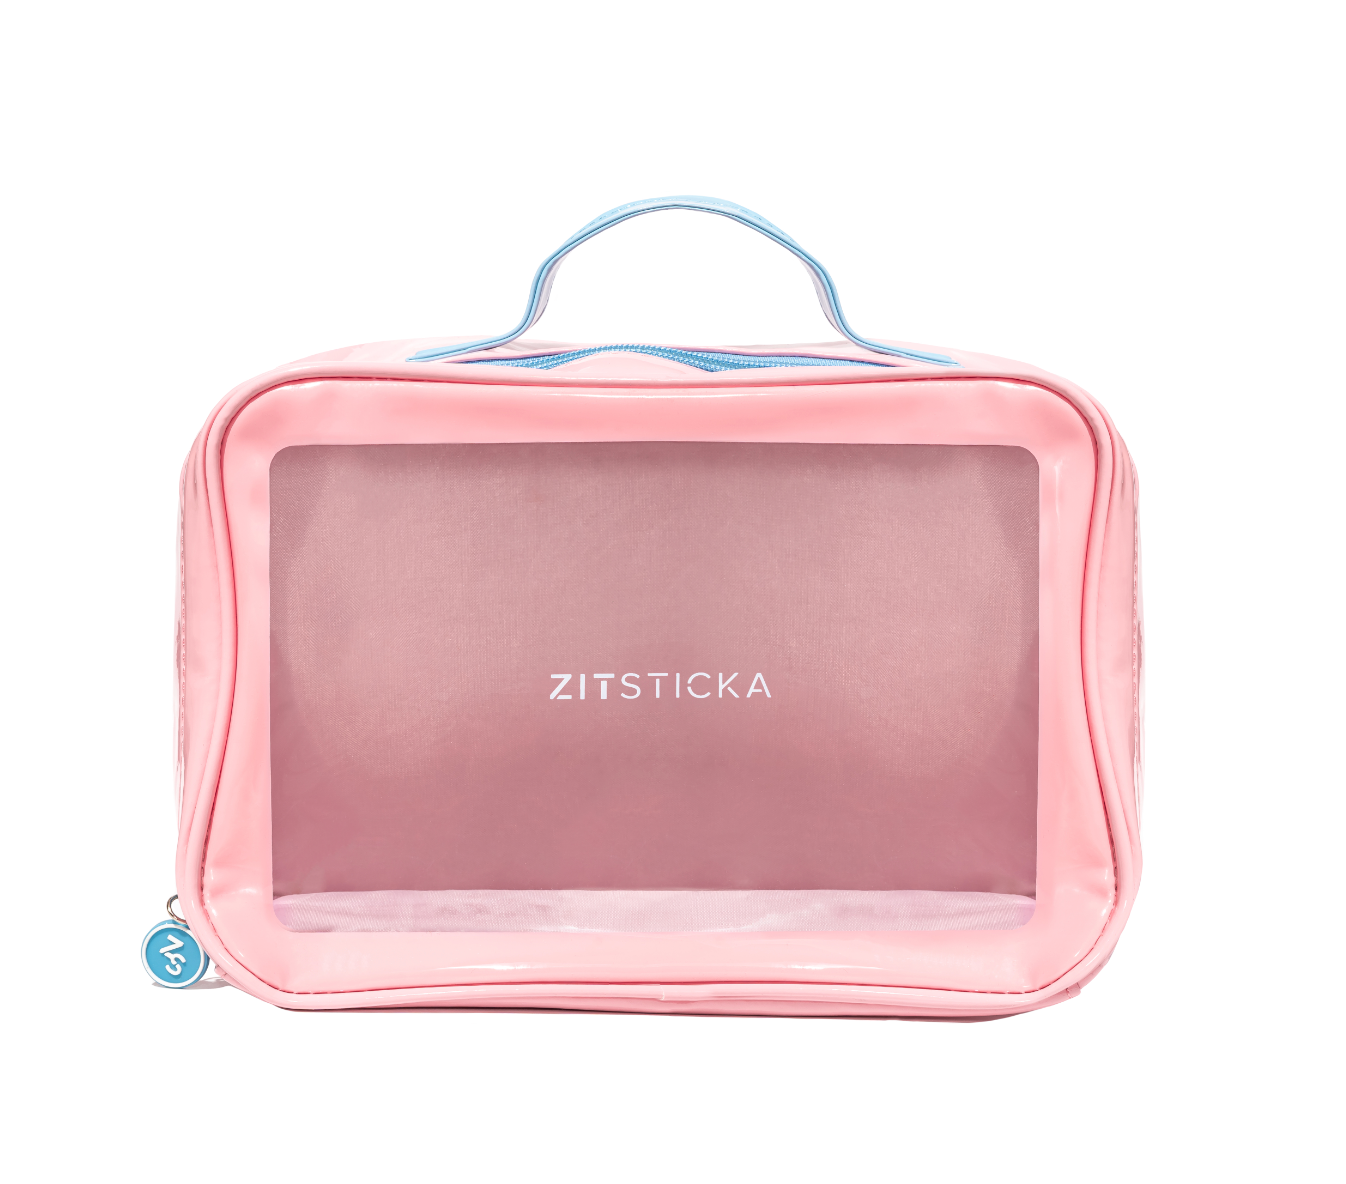 ZS Makeup Bag (Gift with Purchase)